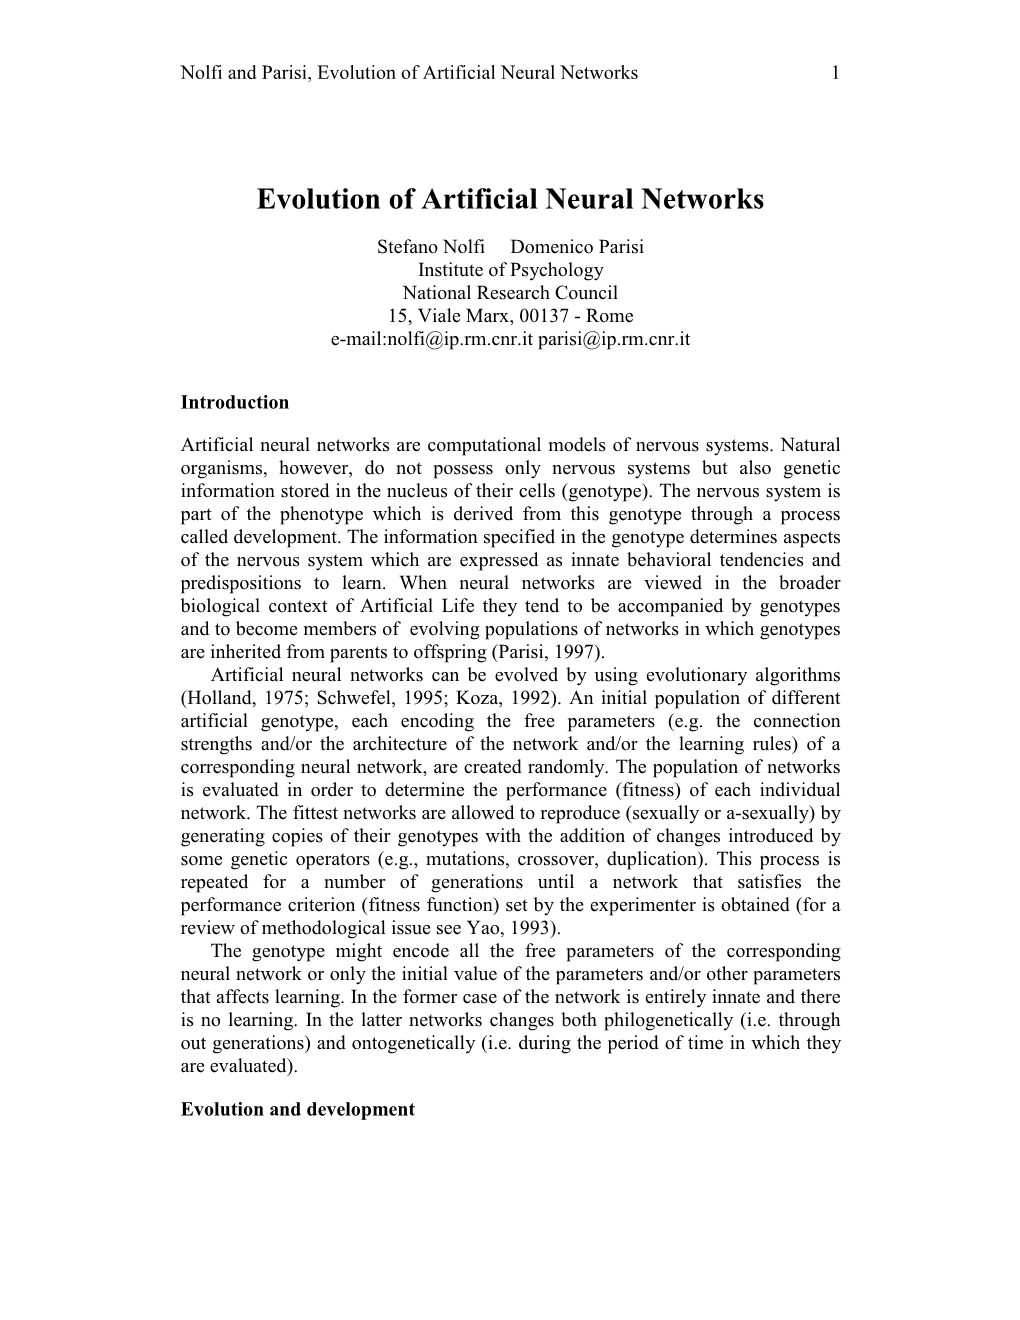 Evolution of Artificial Neural Networks 1